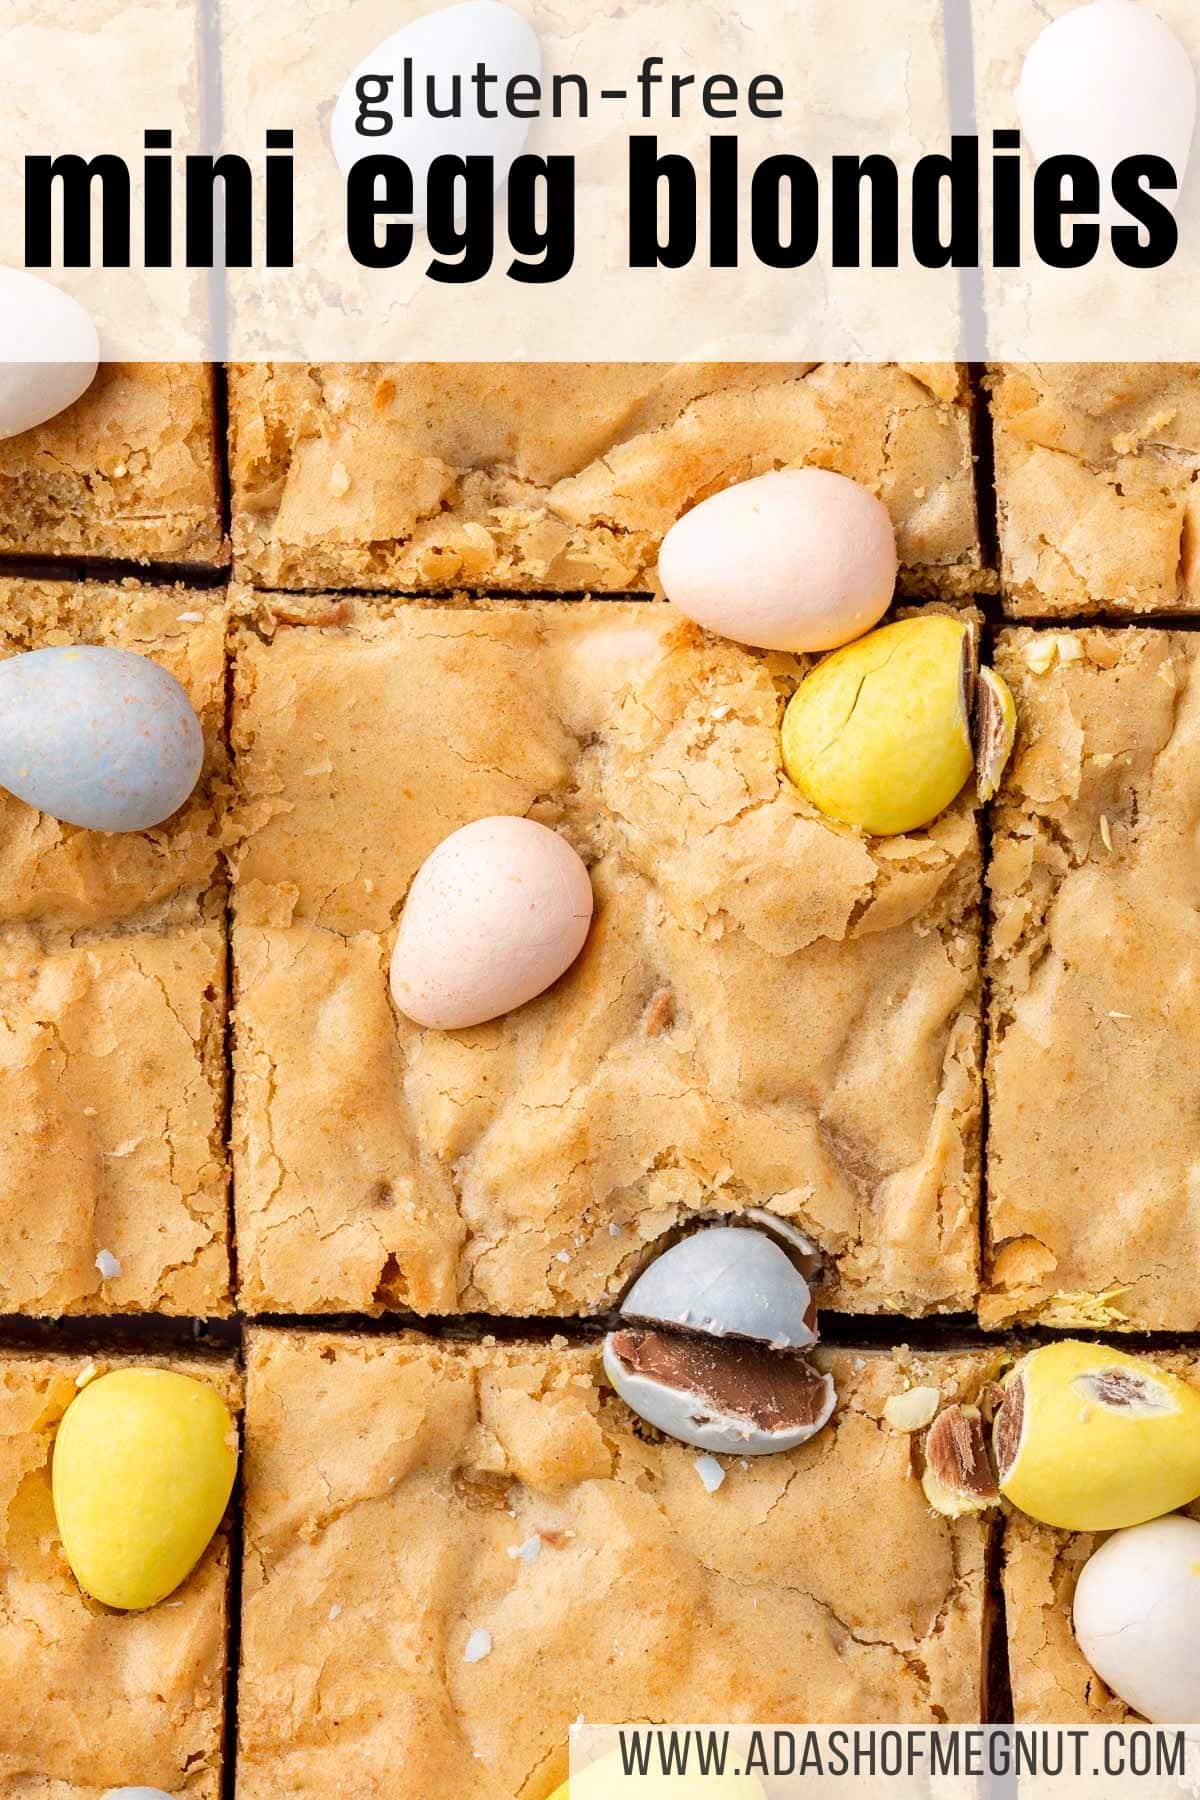 A close up of slices of mini egg blondies with cadbury egs on top.